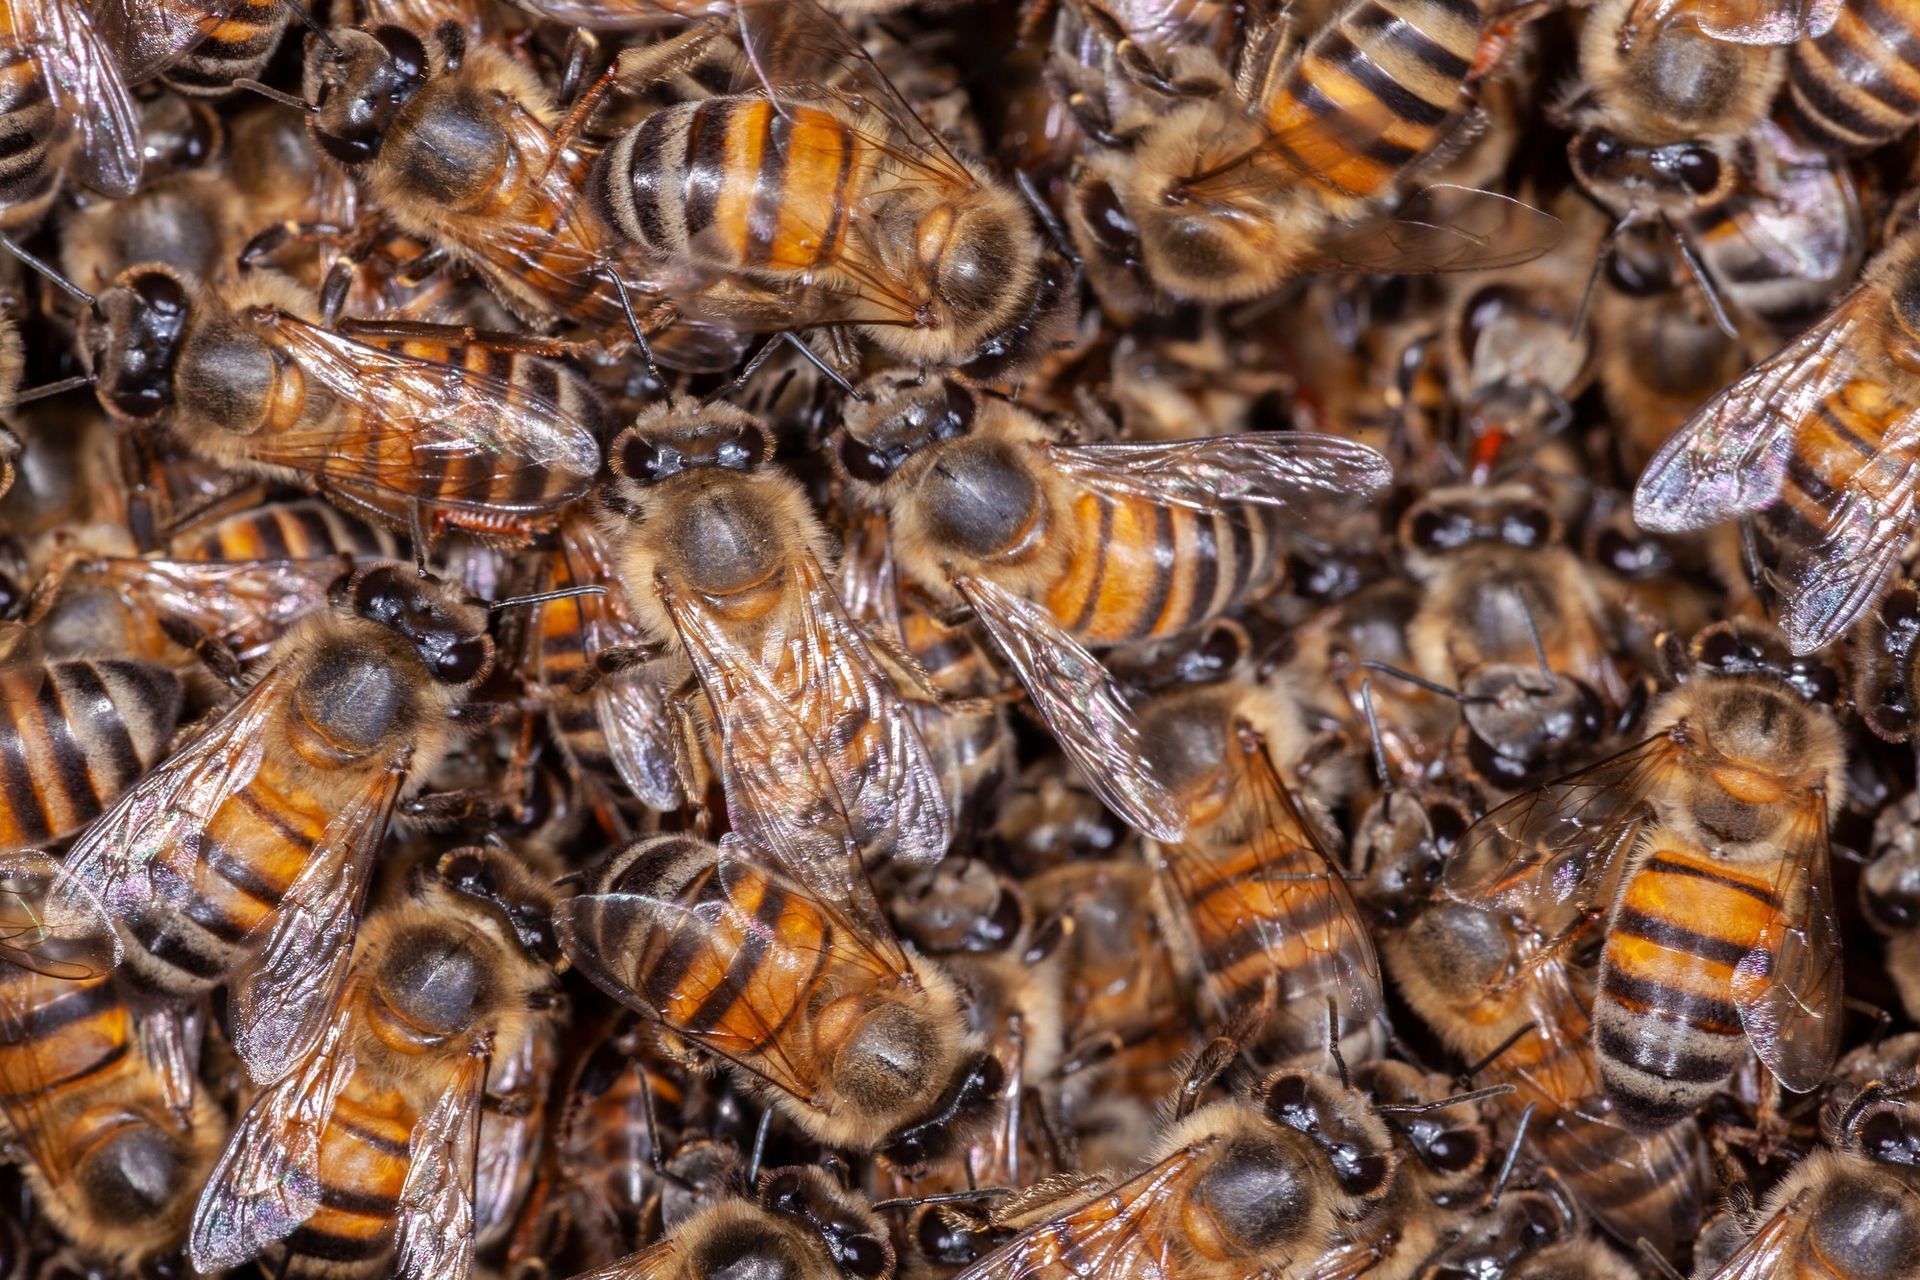 honey bees and wasps control
